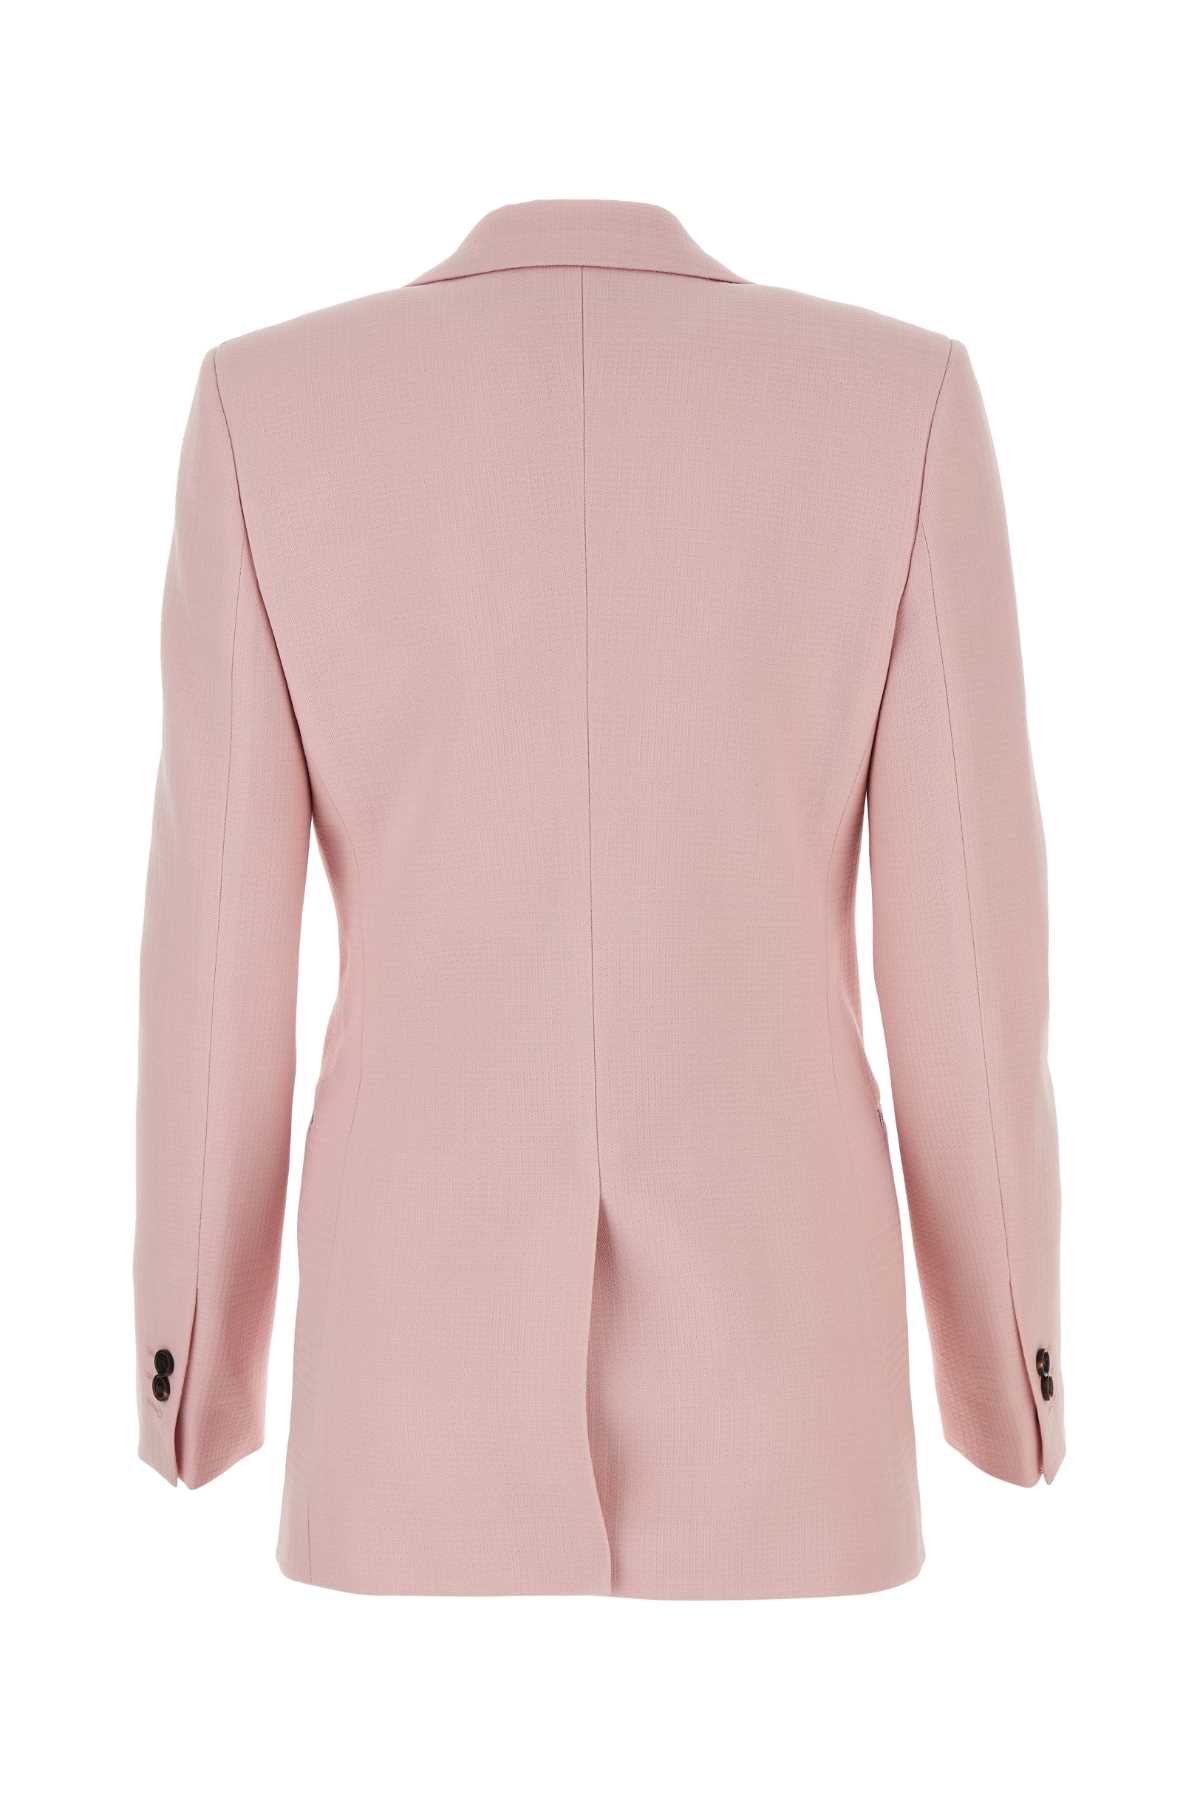 Shop Burberry Pink Wool Blazer In Cameo